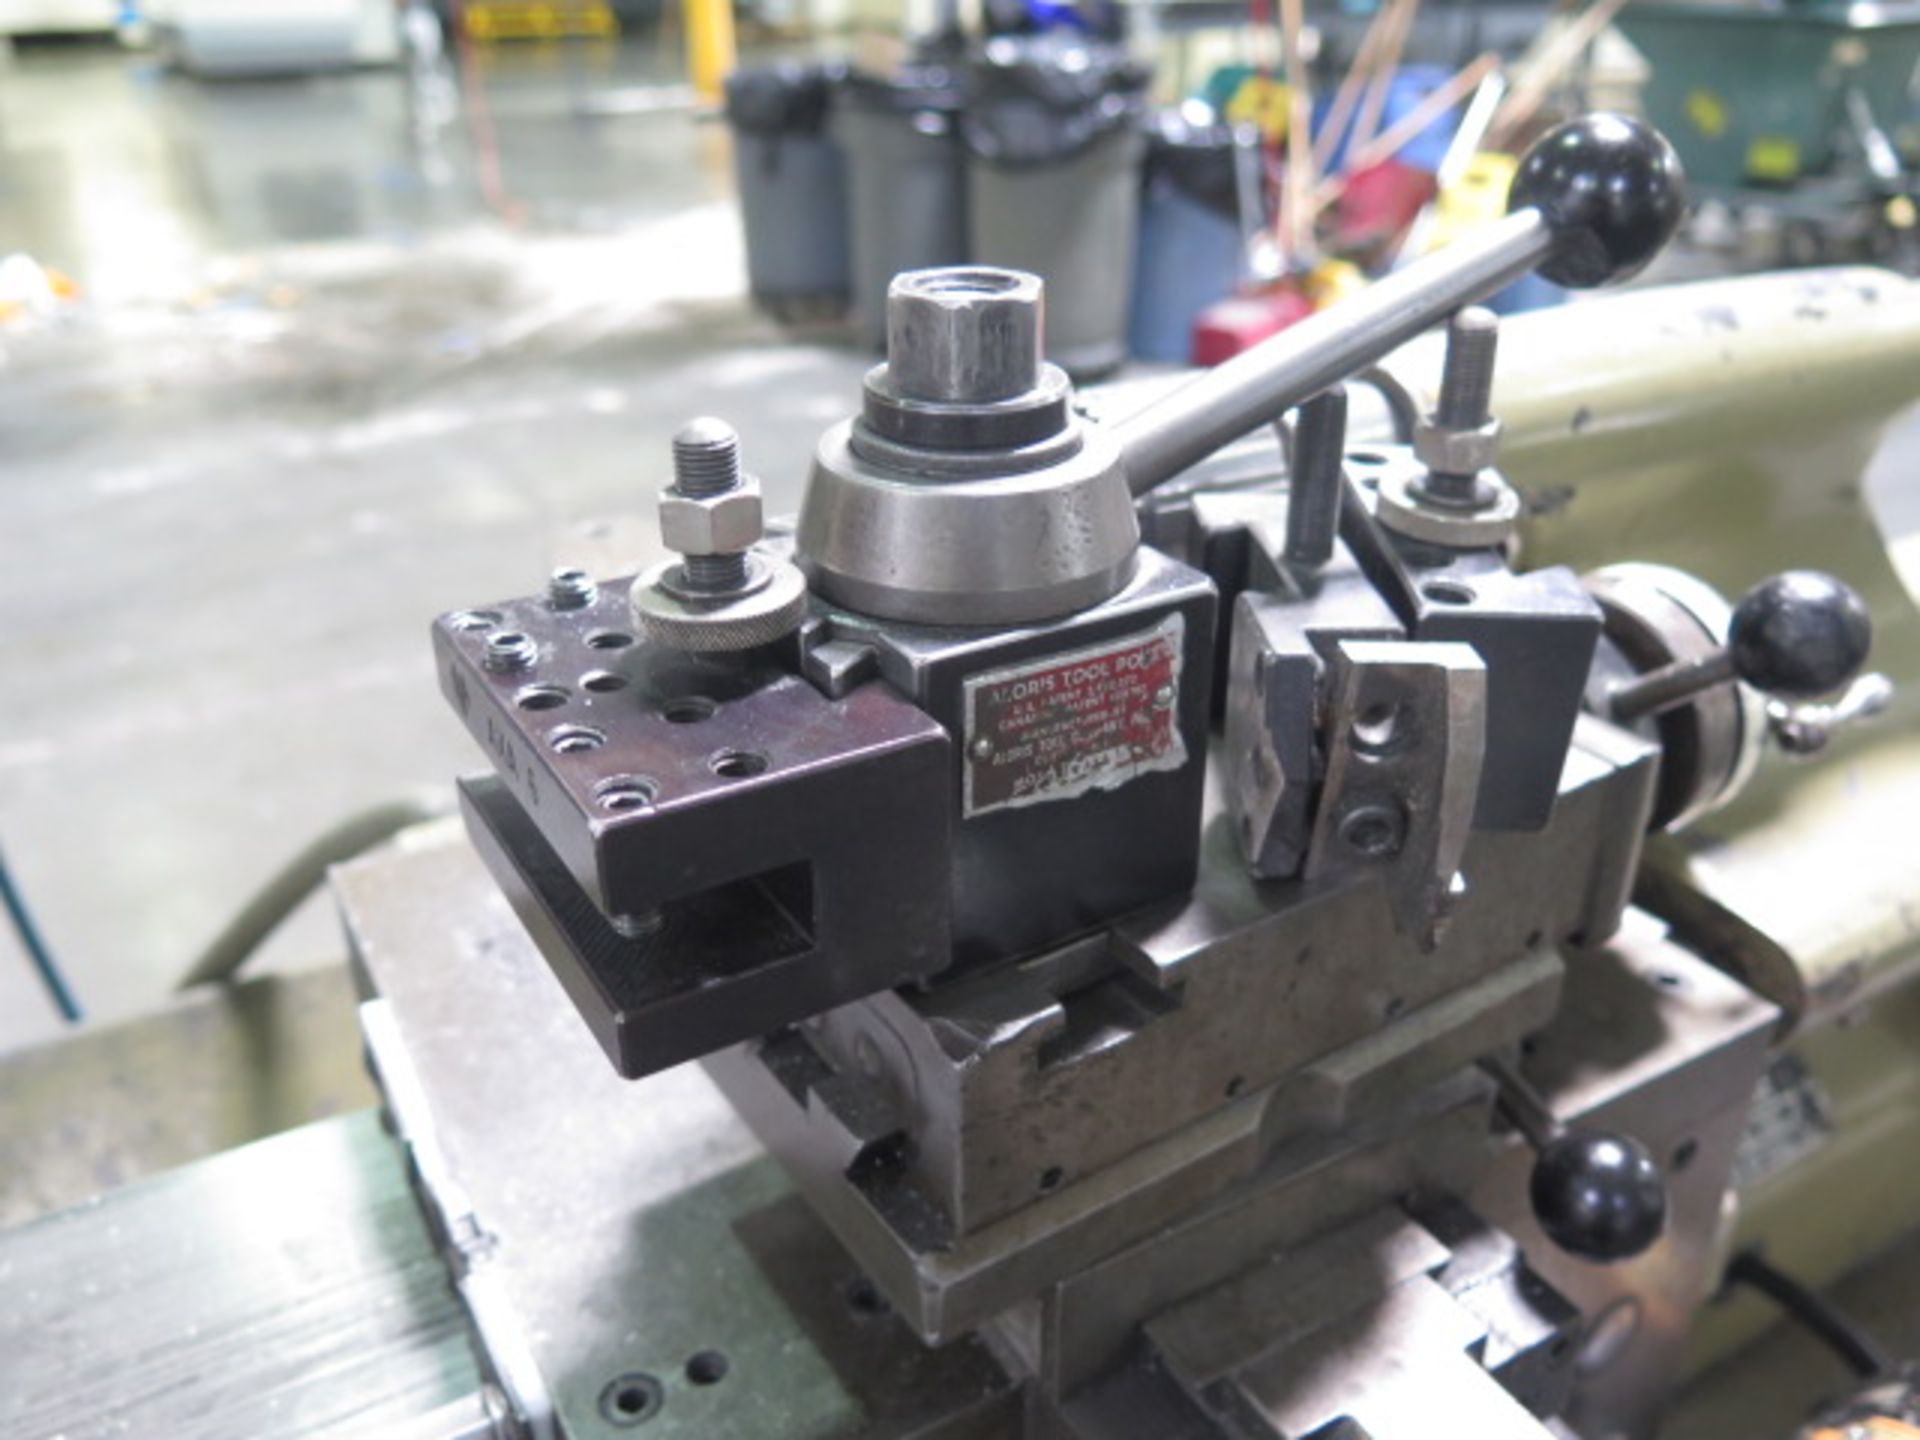 Hardinge TFB Second OP Lathe w/ 125-3000 RPM, 5C Collet Closer, PF, Aloris Tool Post, SOLD AS IS - Image 5 of 10